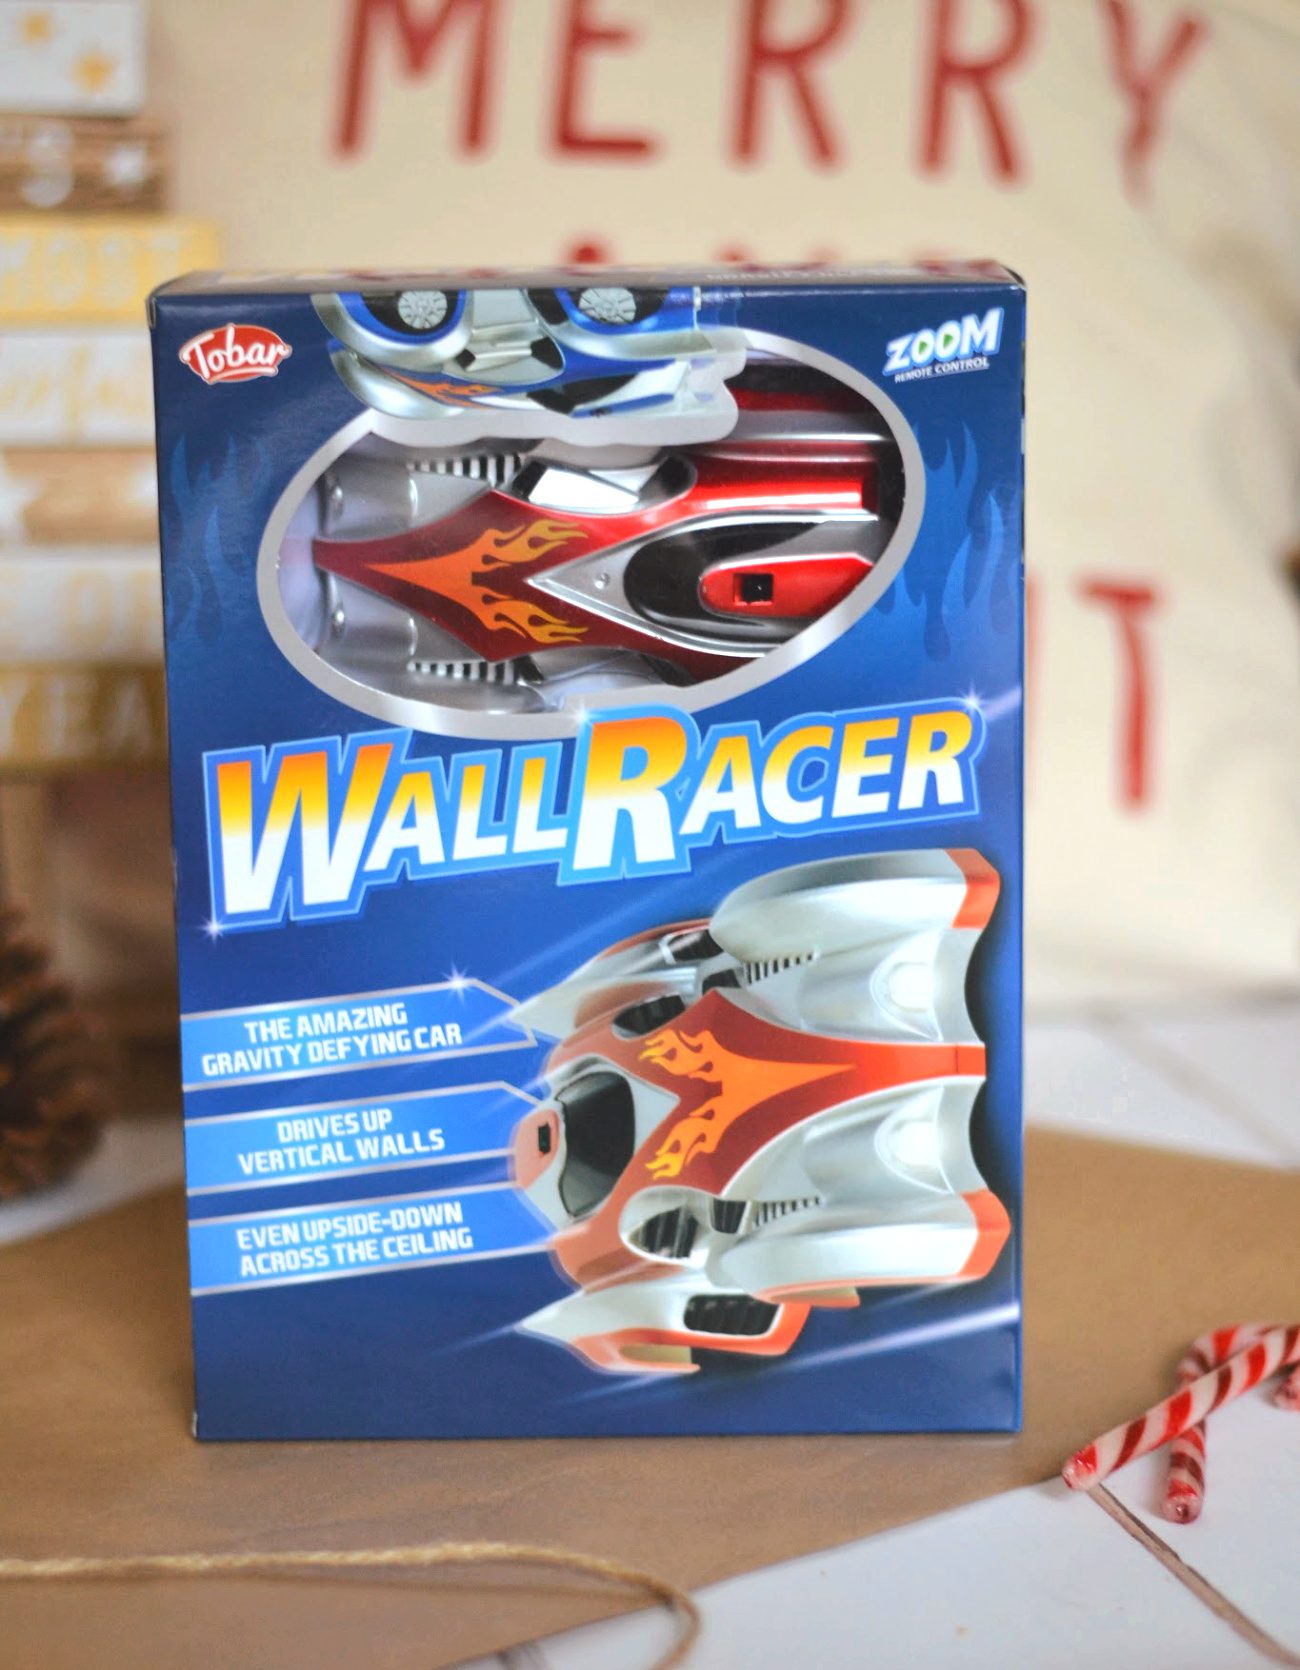 Wall Racer | The Christmas Gift Guide for Kids Aged 6-10